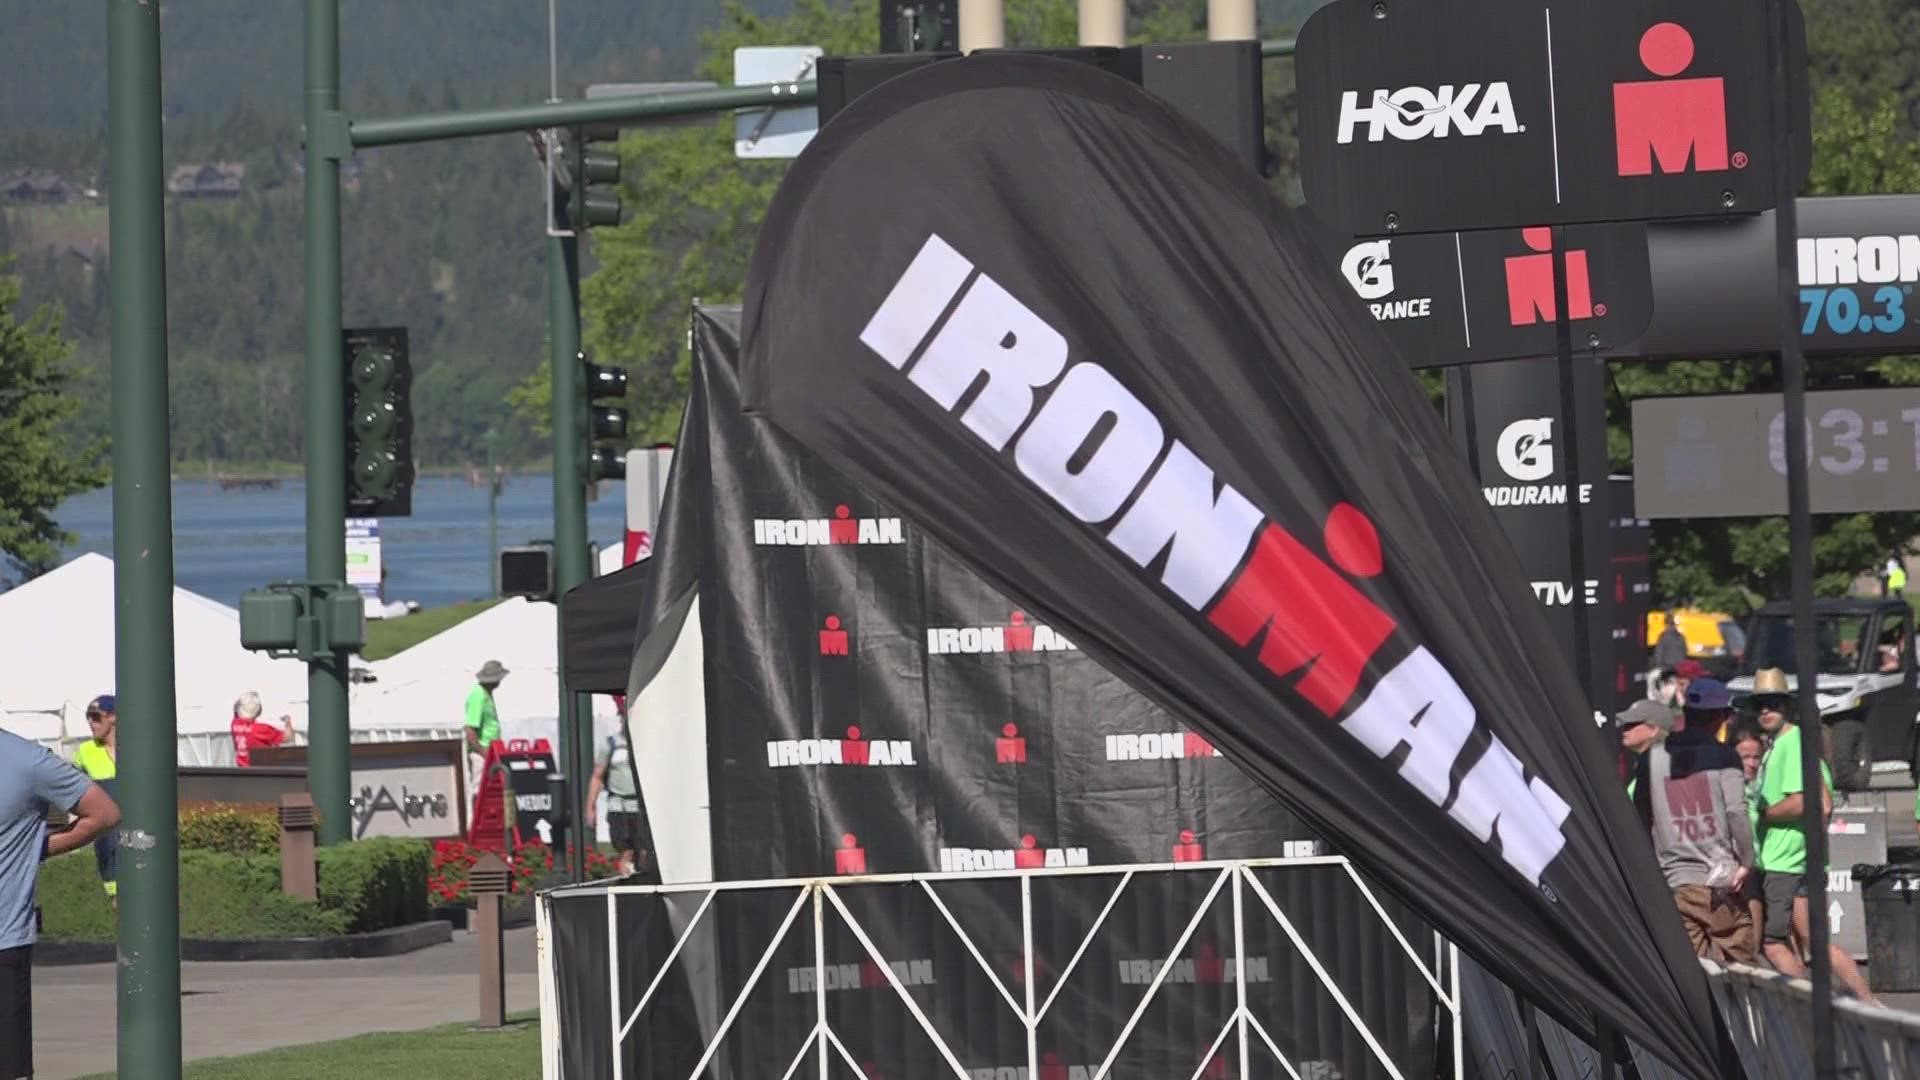 After four hours of swimming, biking and running a total of 70.3 miles, the first Coeur d’Alene Ironman 2022 participant crossed the finish line.